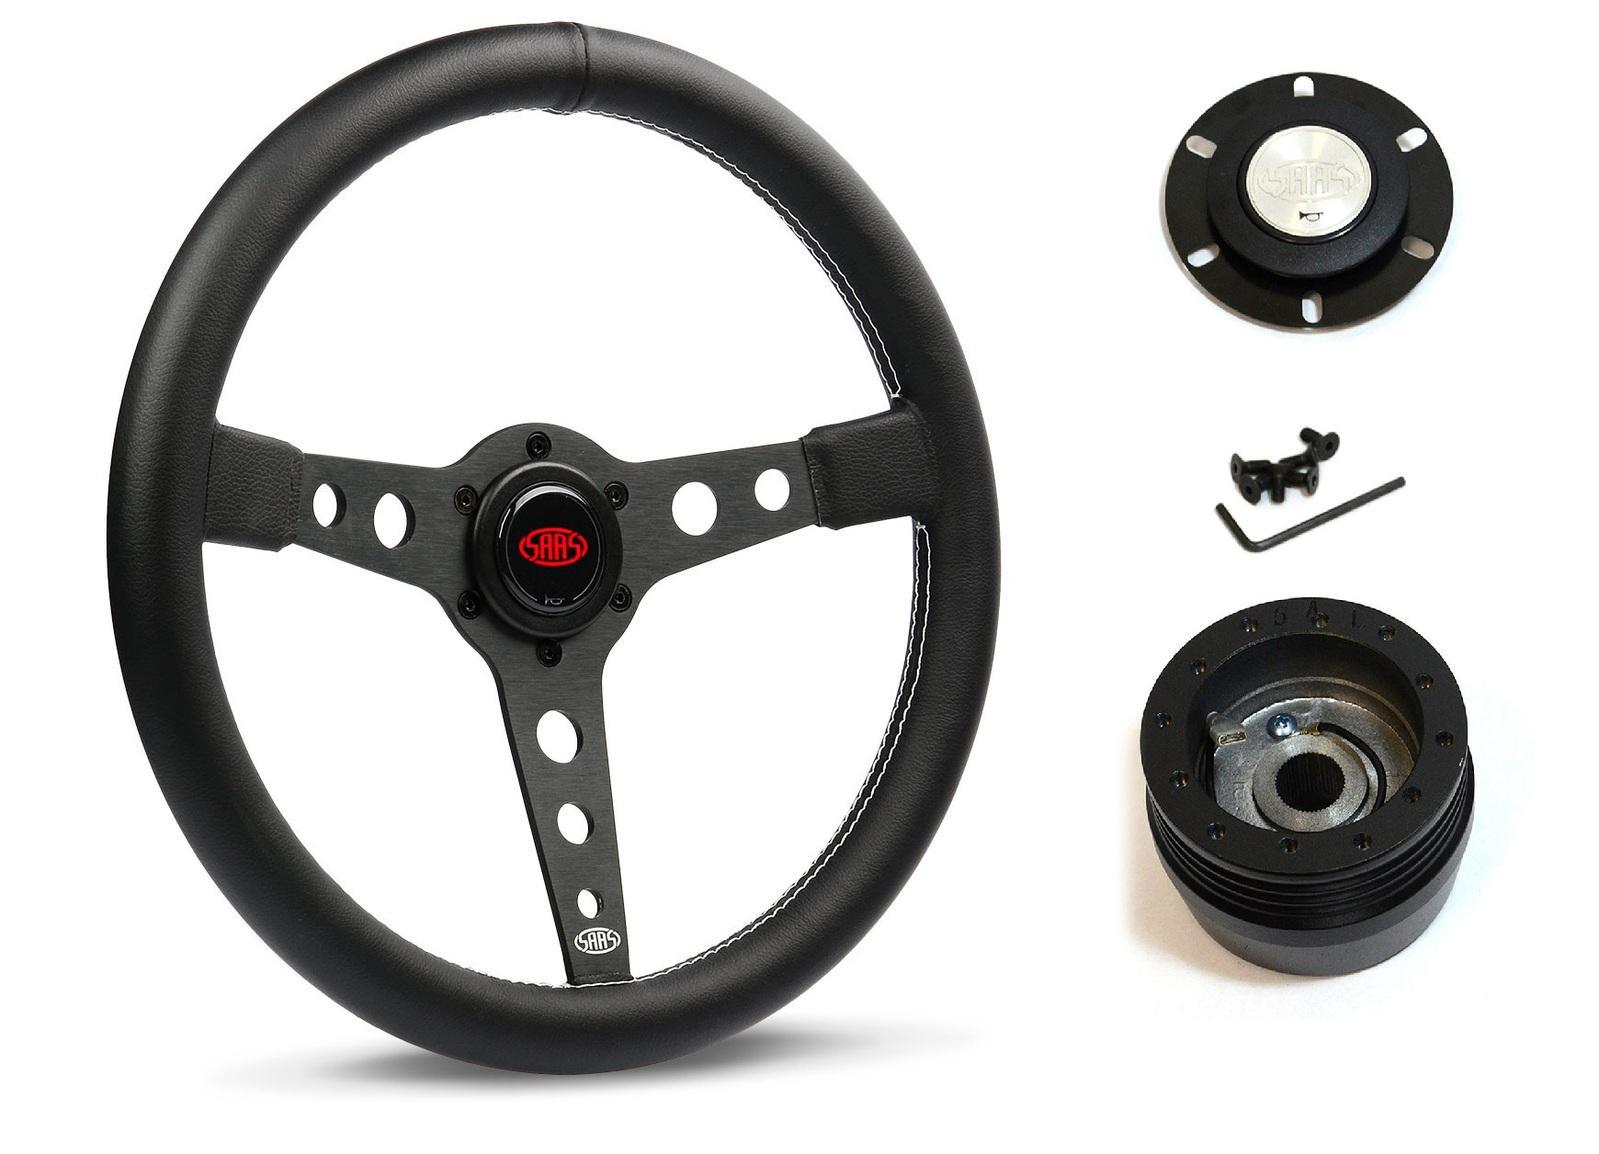 SAAS Steering Wheel Leatherette 14" ADR Retro Black Spoke White Stitching SW616OS-WS and SAAS boss kit for American Motors All Models (except Alliance